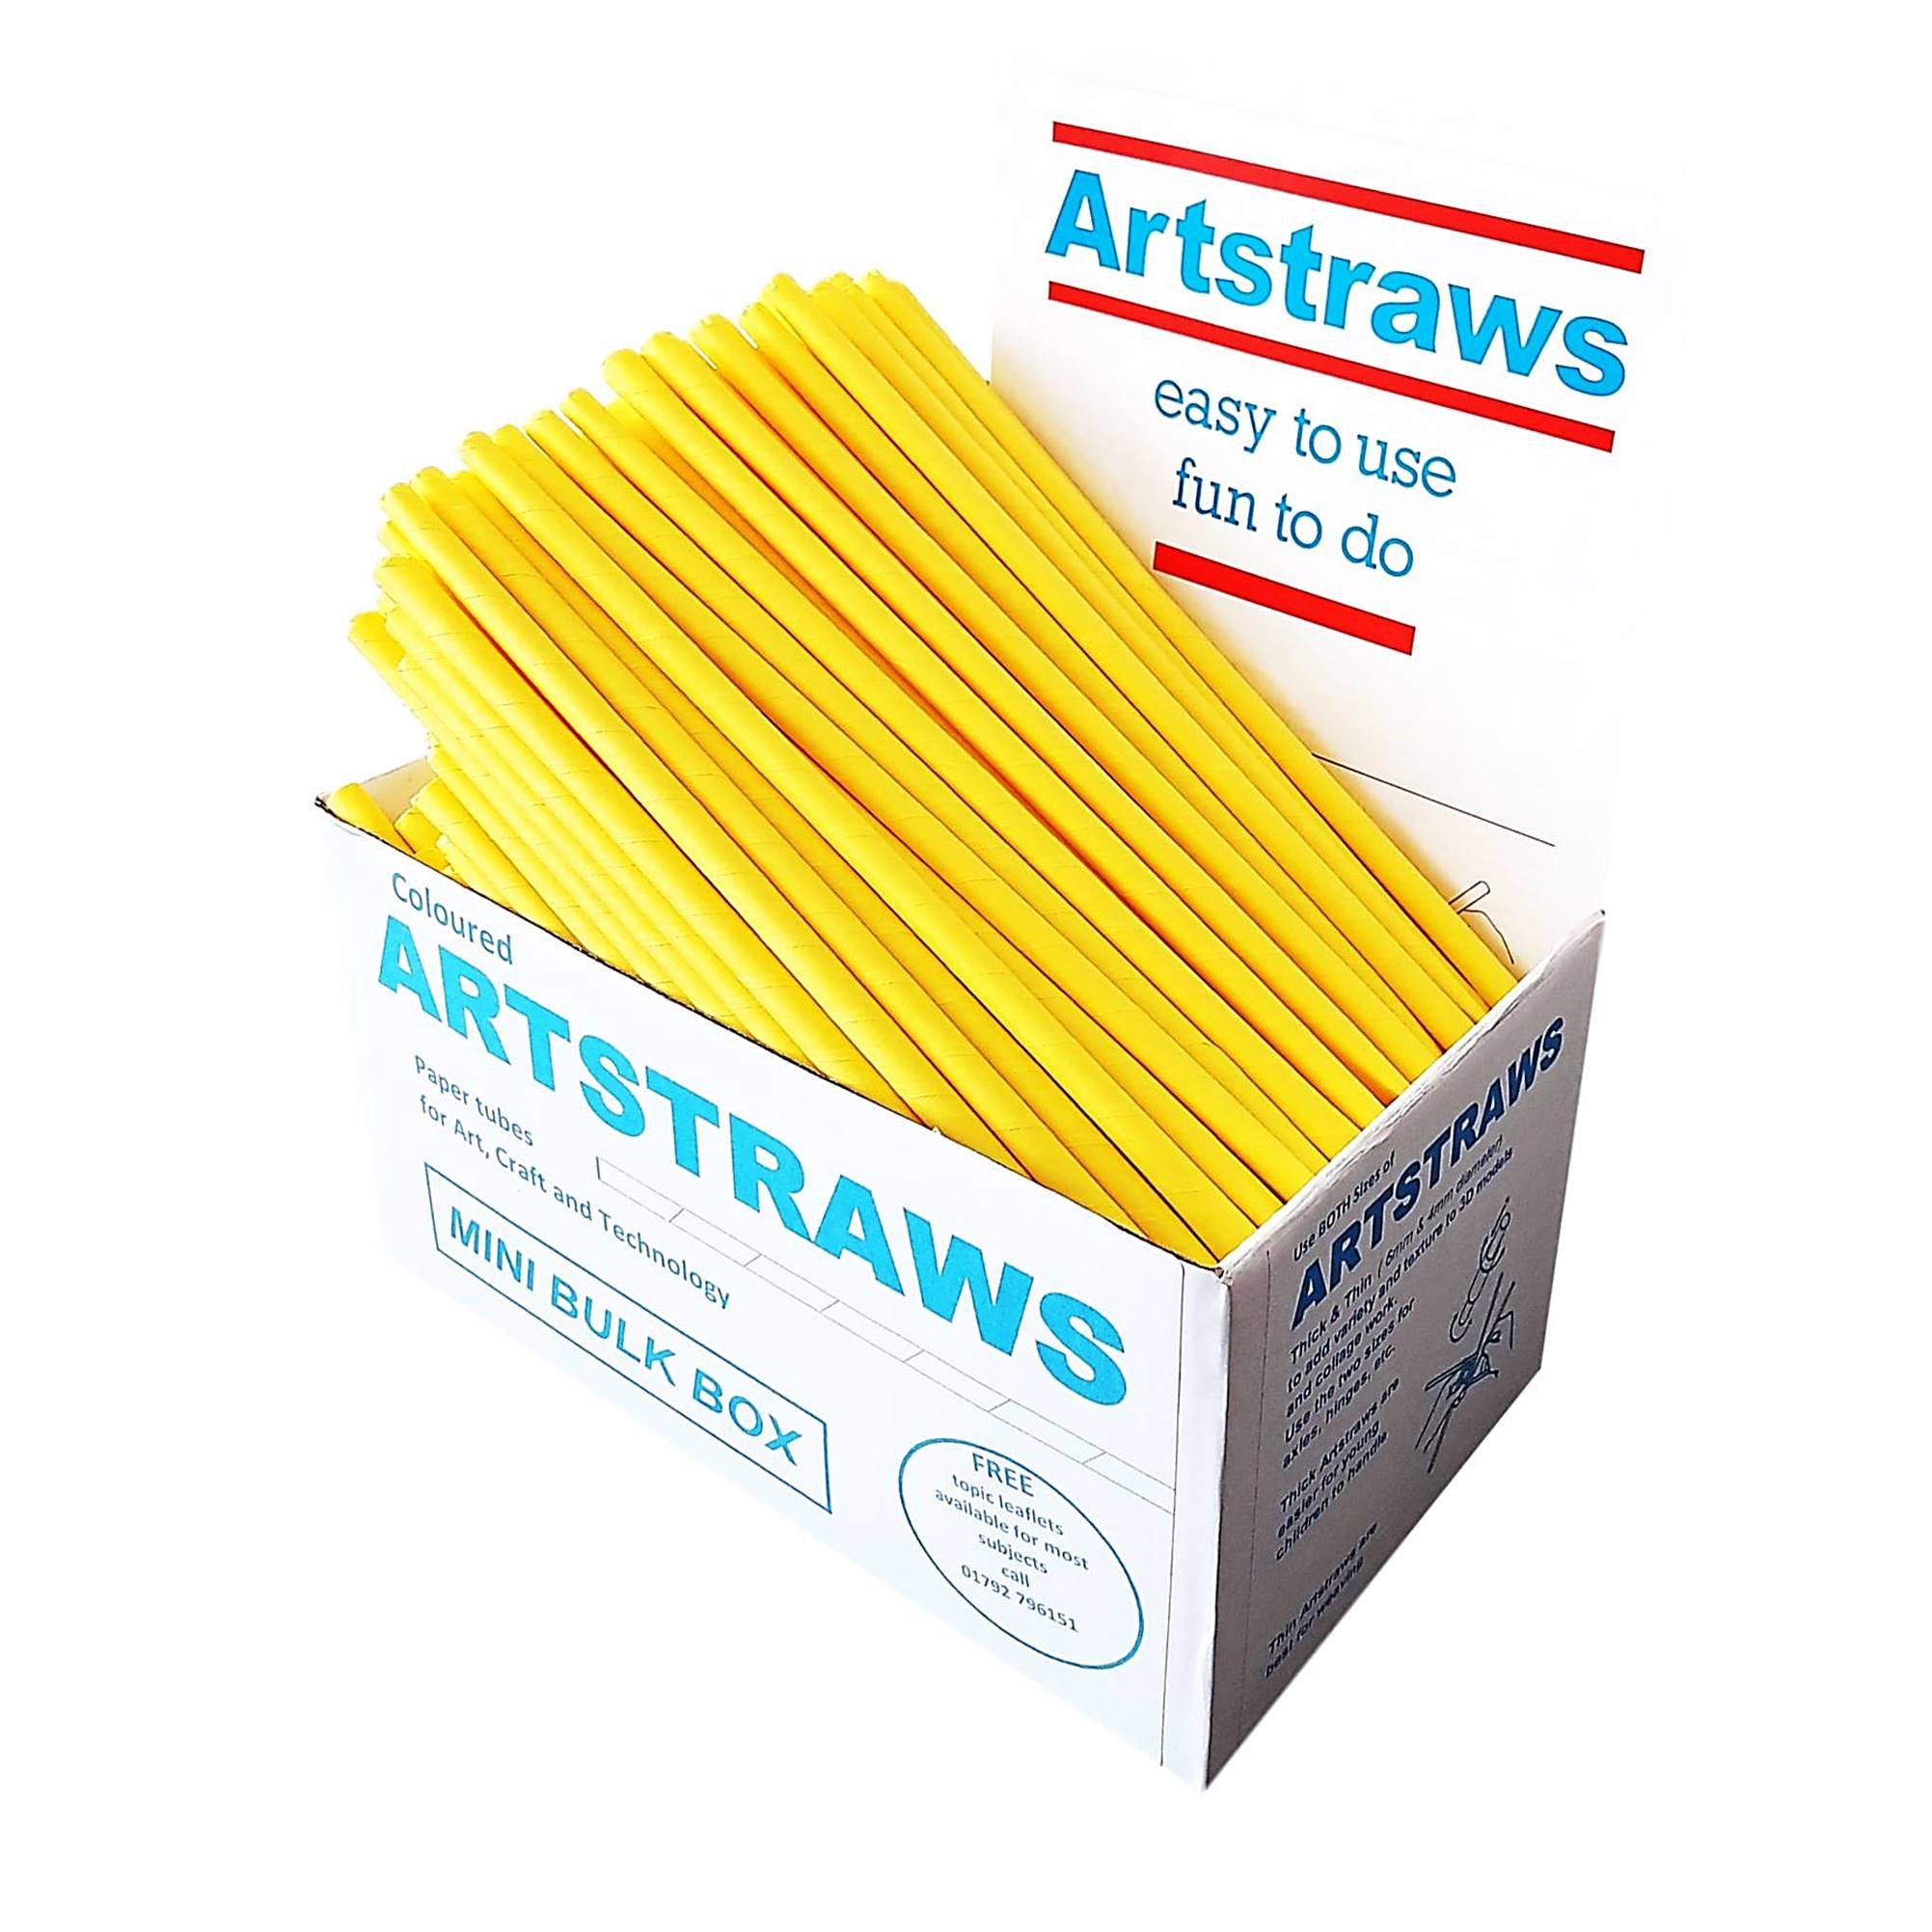 Artstraws Long Paper Straws Bulk Pack for Arts and Crafts 1,800 Pieces 